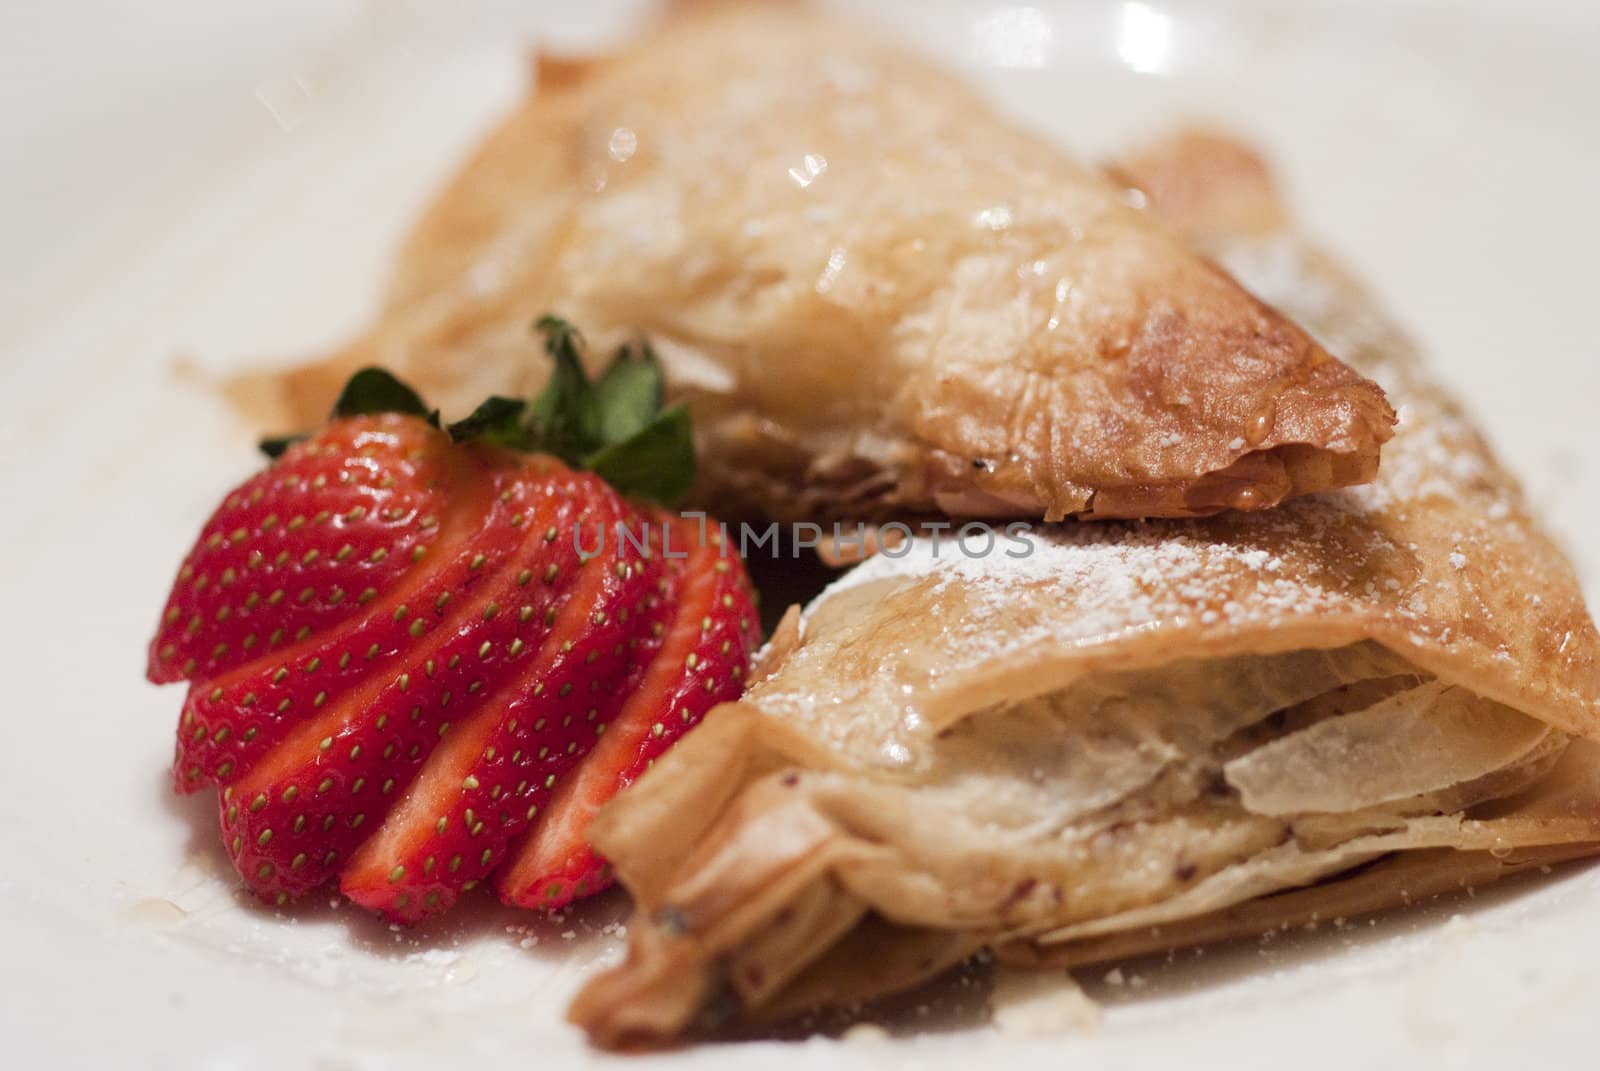 Filled Apple Pastries by edan